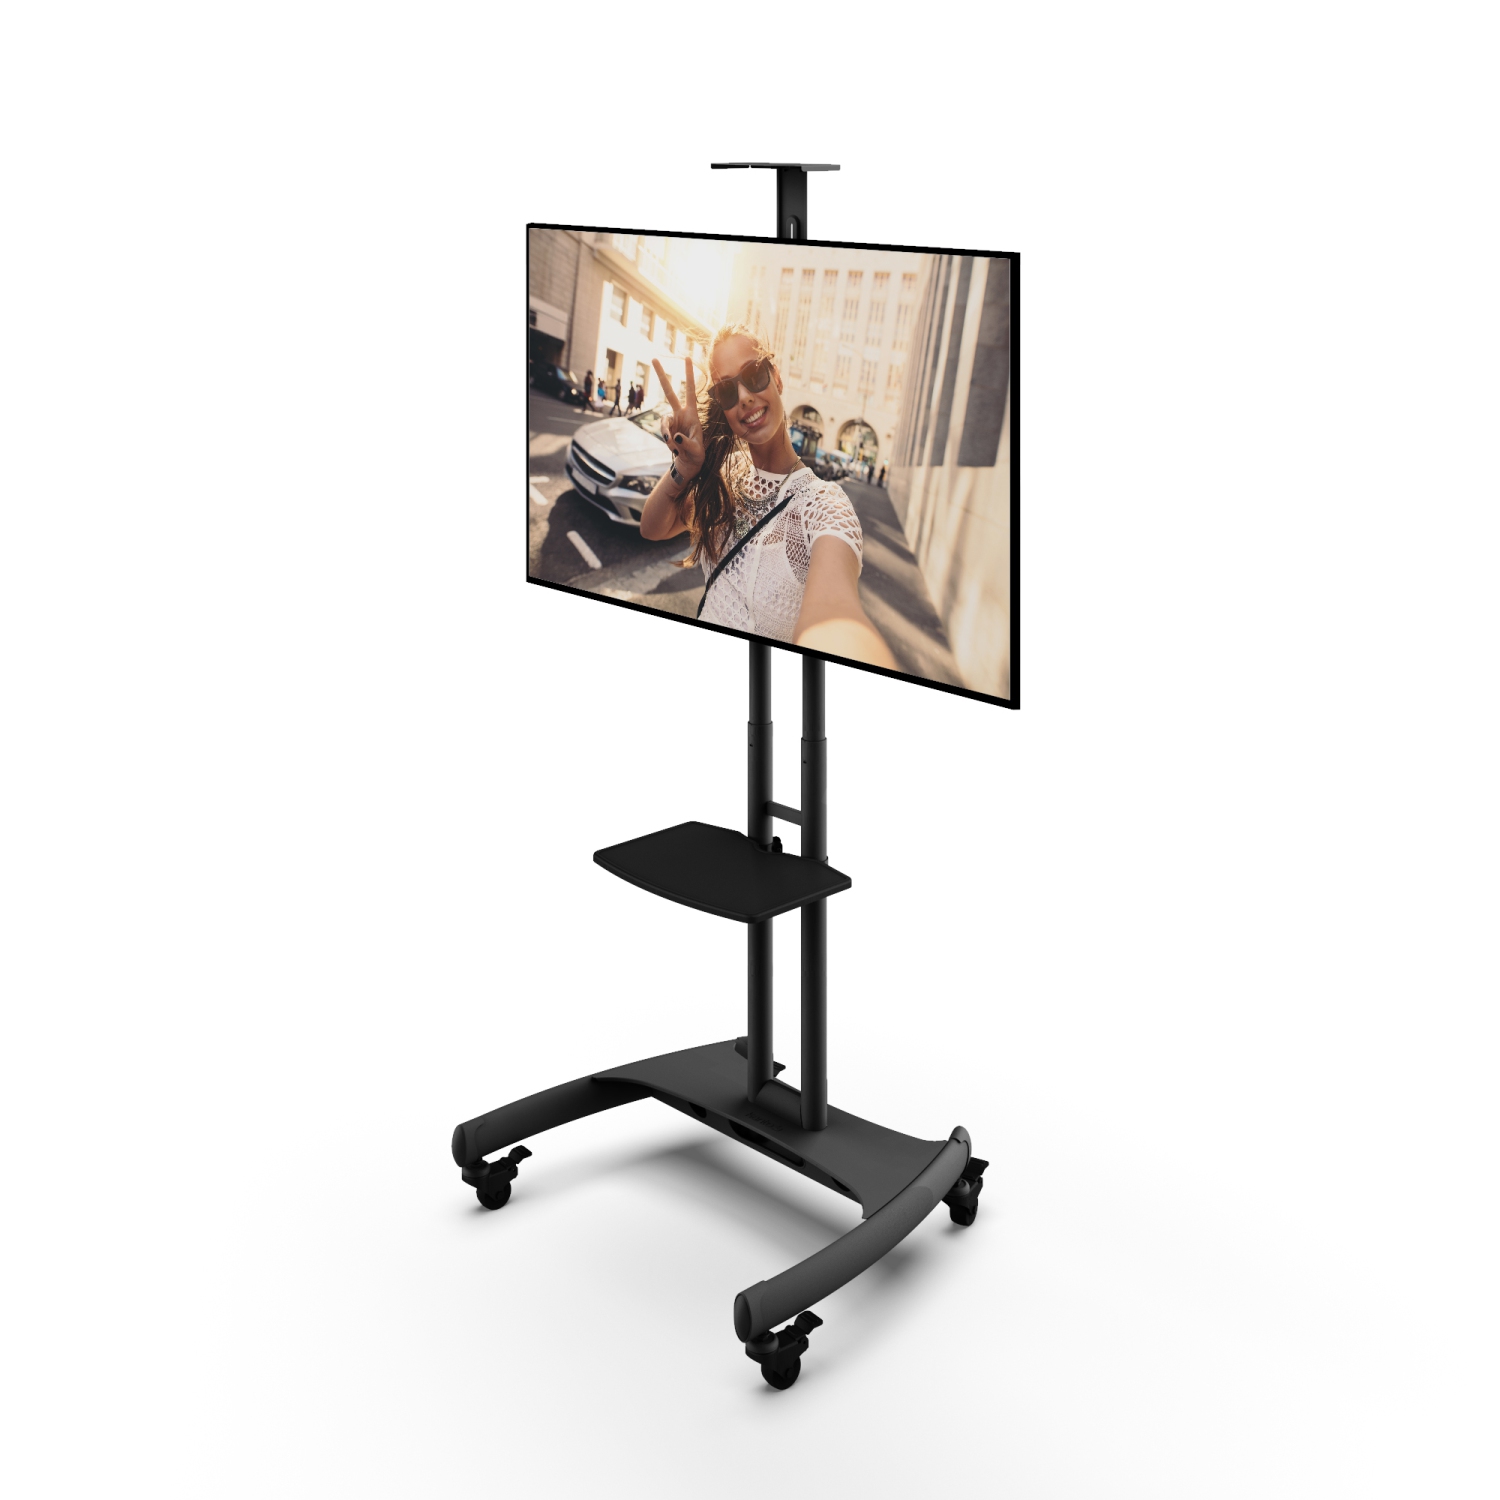 Kanto Mtm65pl Mobile Tv Mount With Adjustable Shelf For 37 Inch To 65 Inch Tvs Best Buy Canada